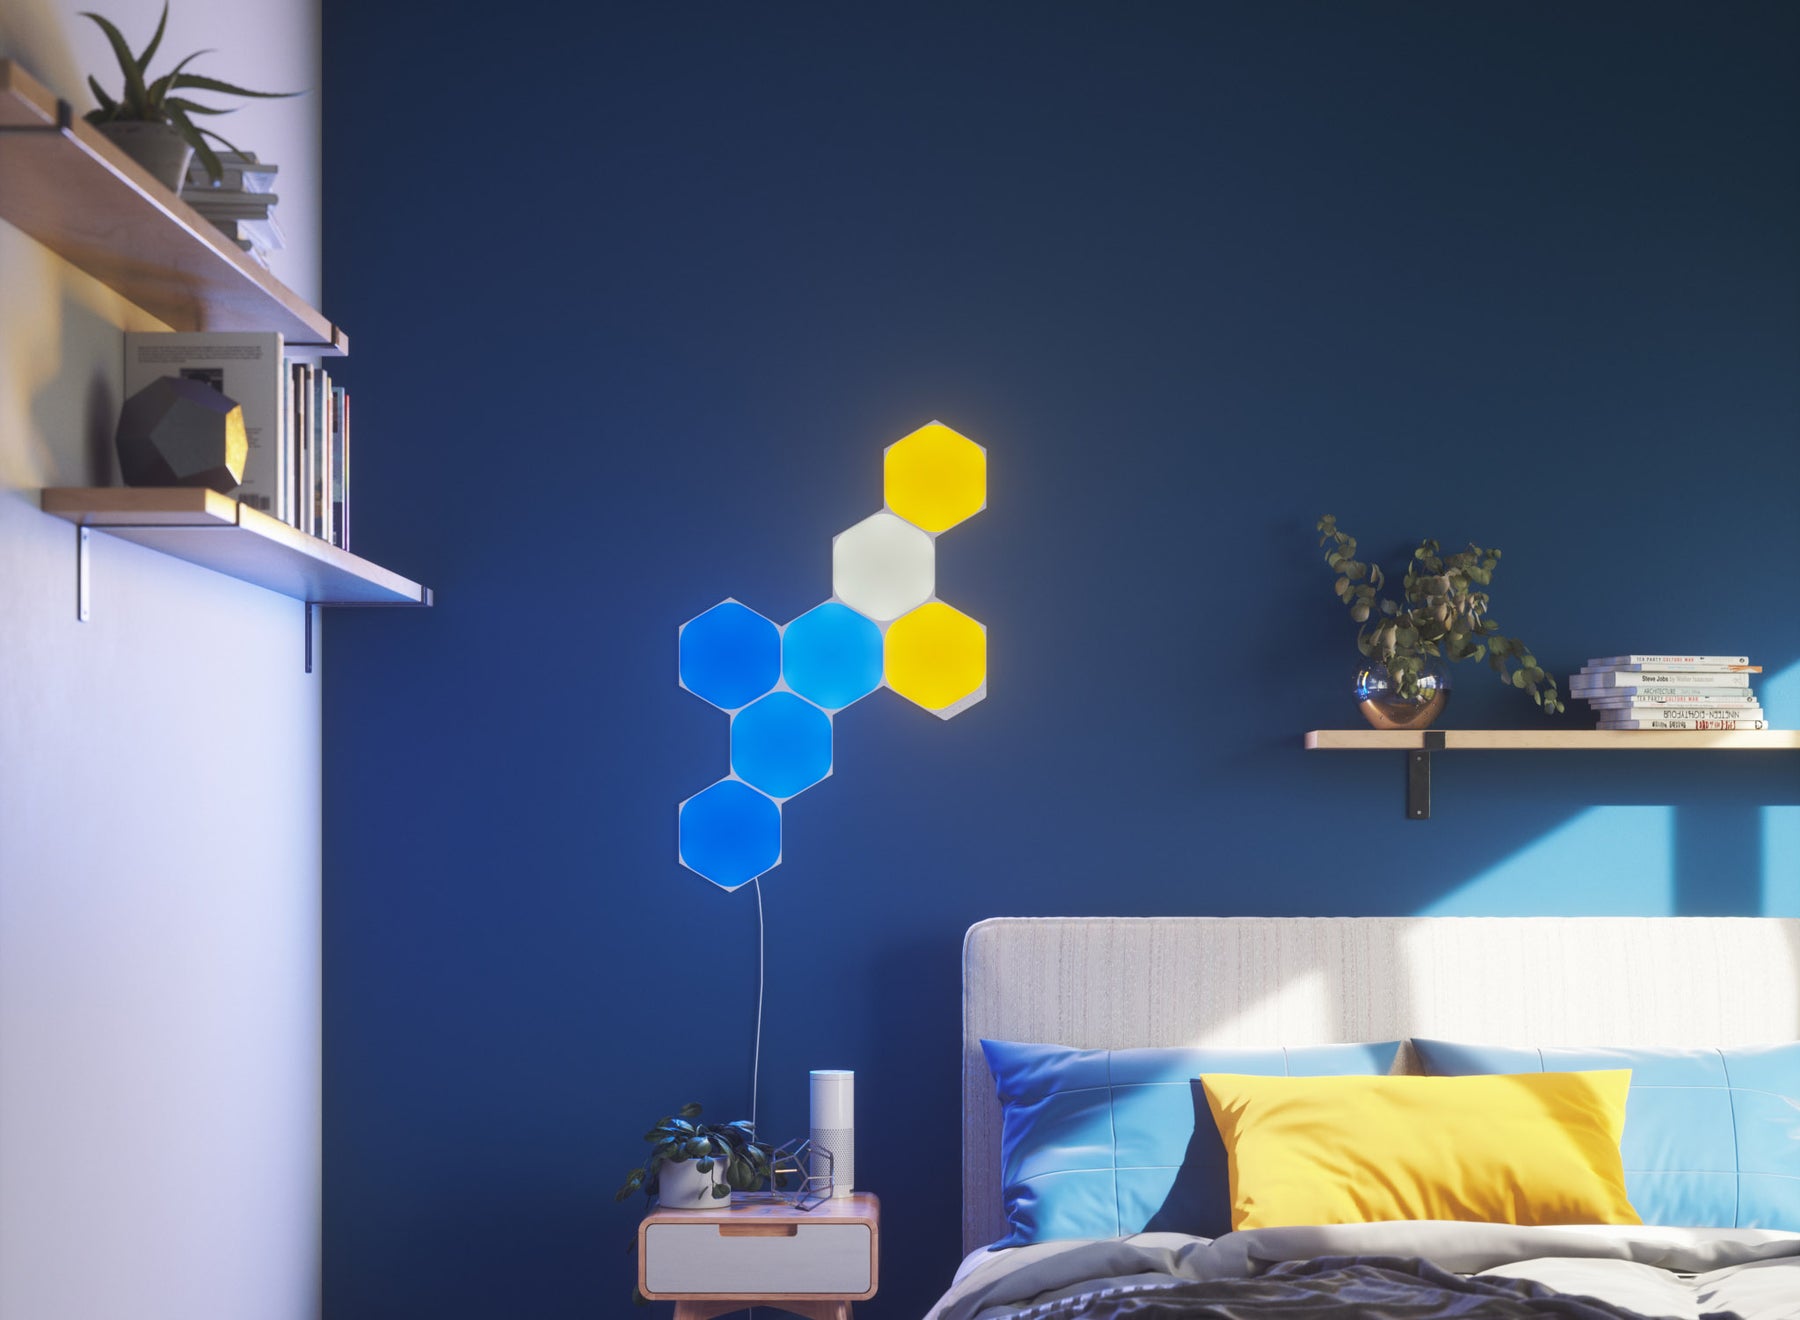 A Bright Idea for your Smart Home